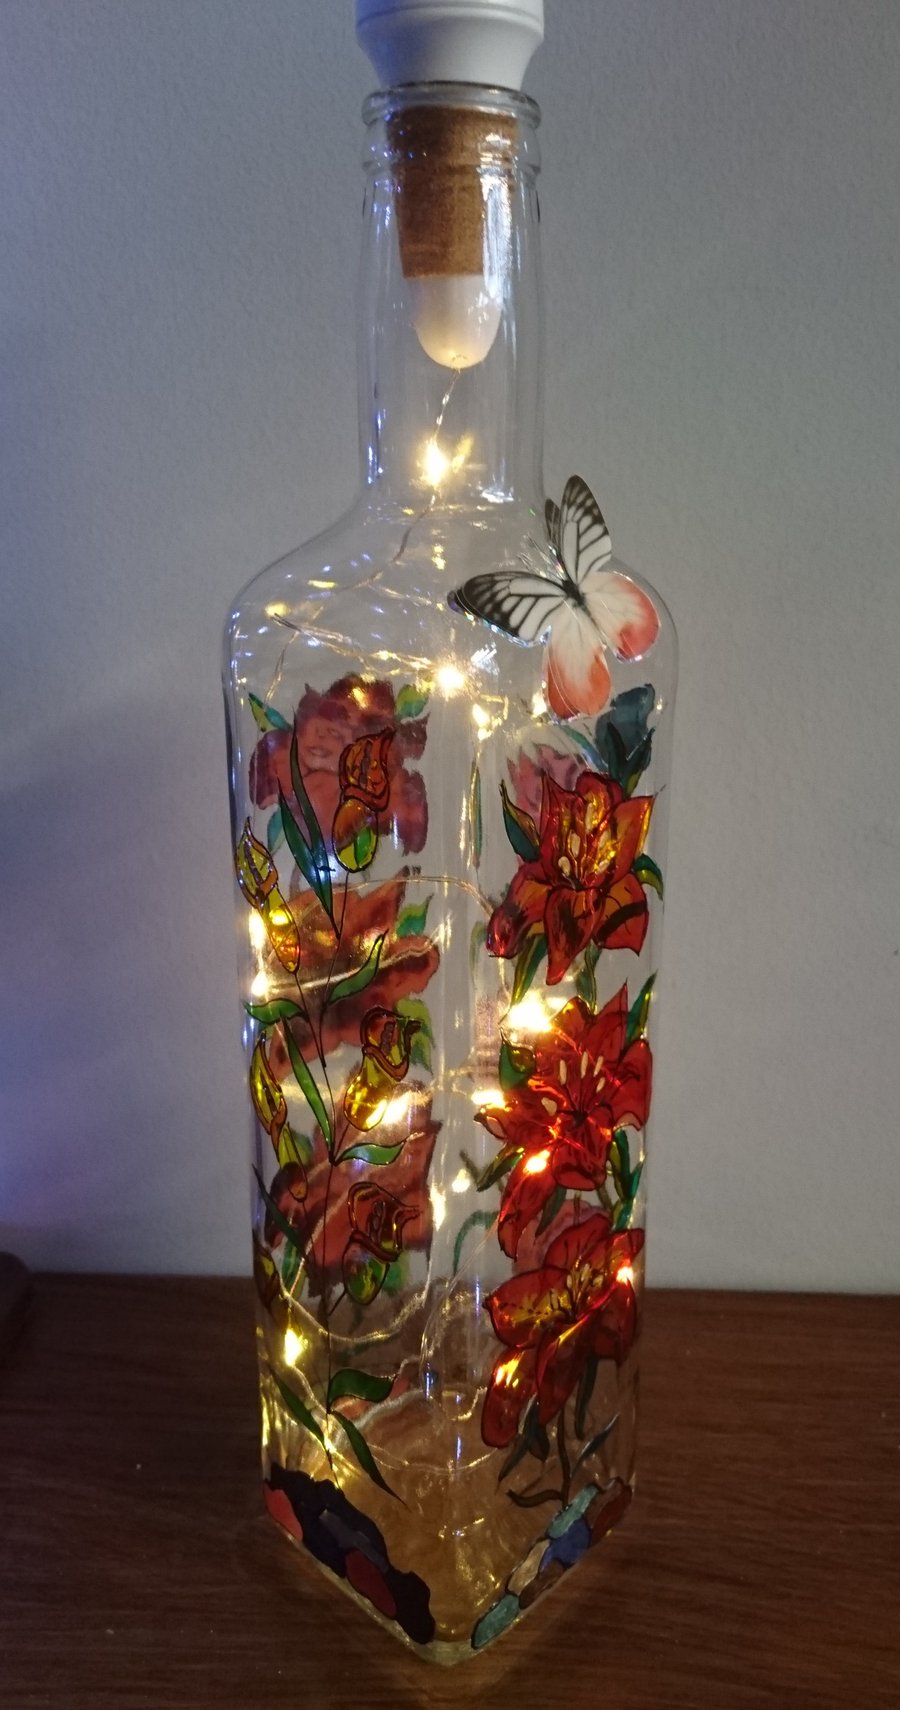 Dreaming of Lilies - Handpainted Bottle Lamp